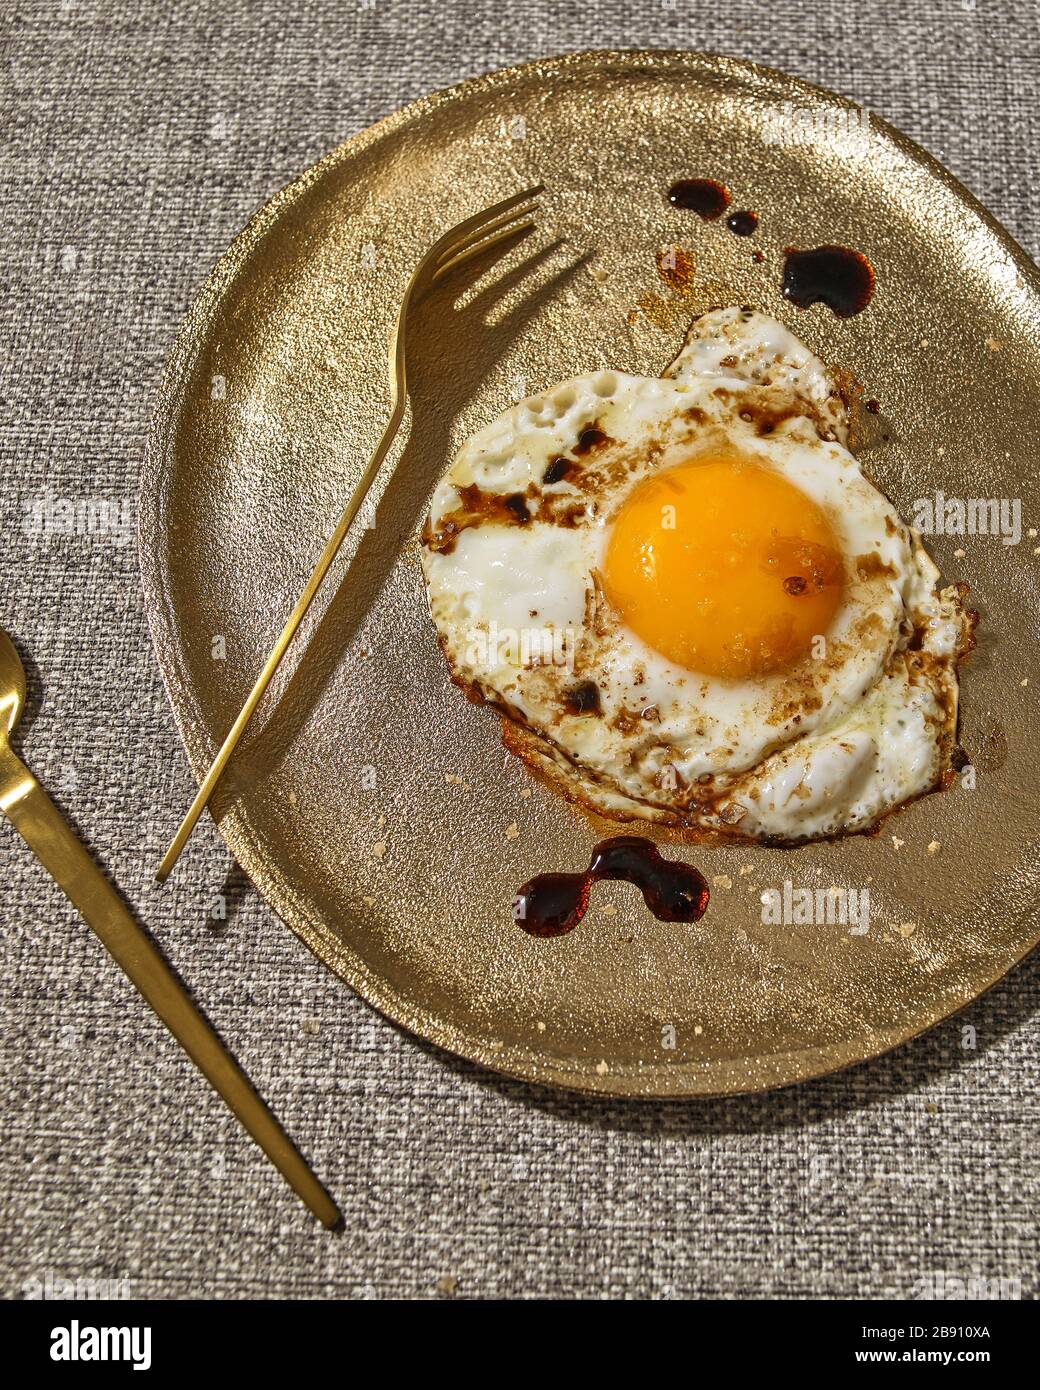 Fried egg with Balsamic vinegar and sea salt Stock Photo